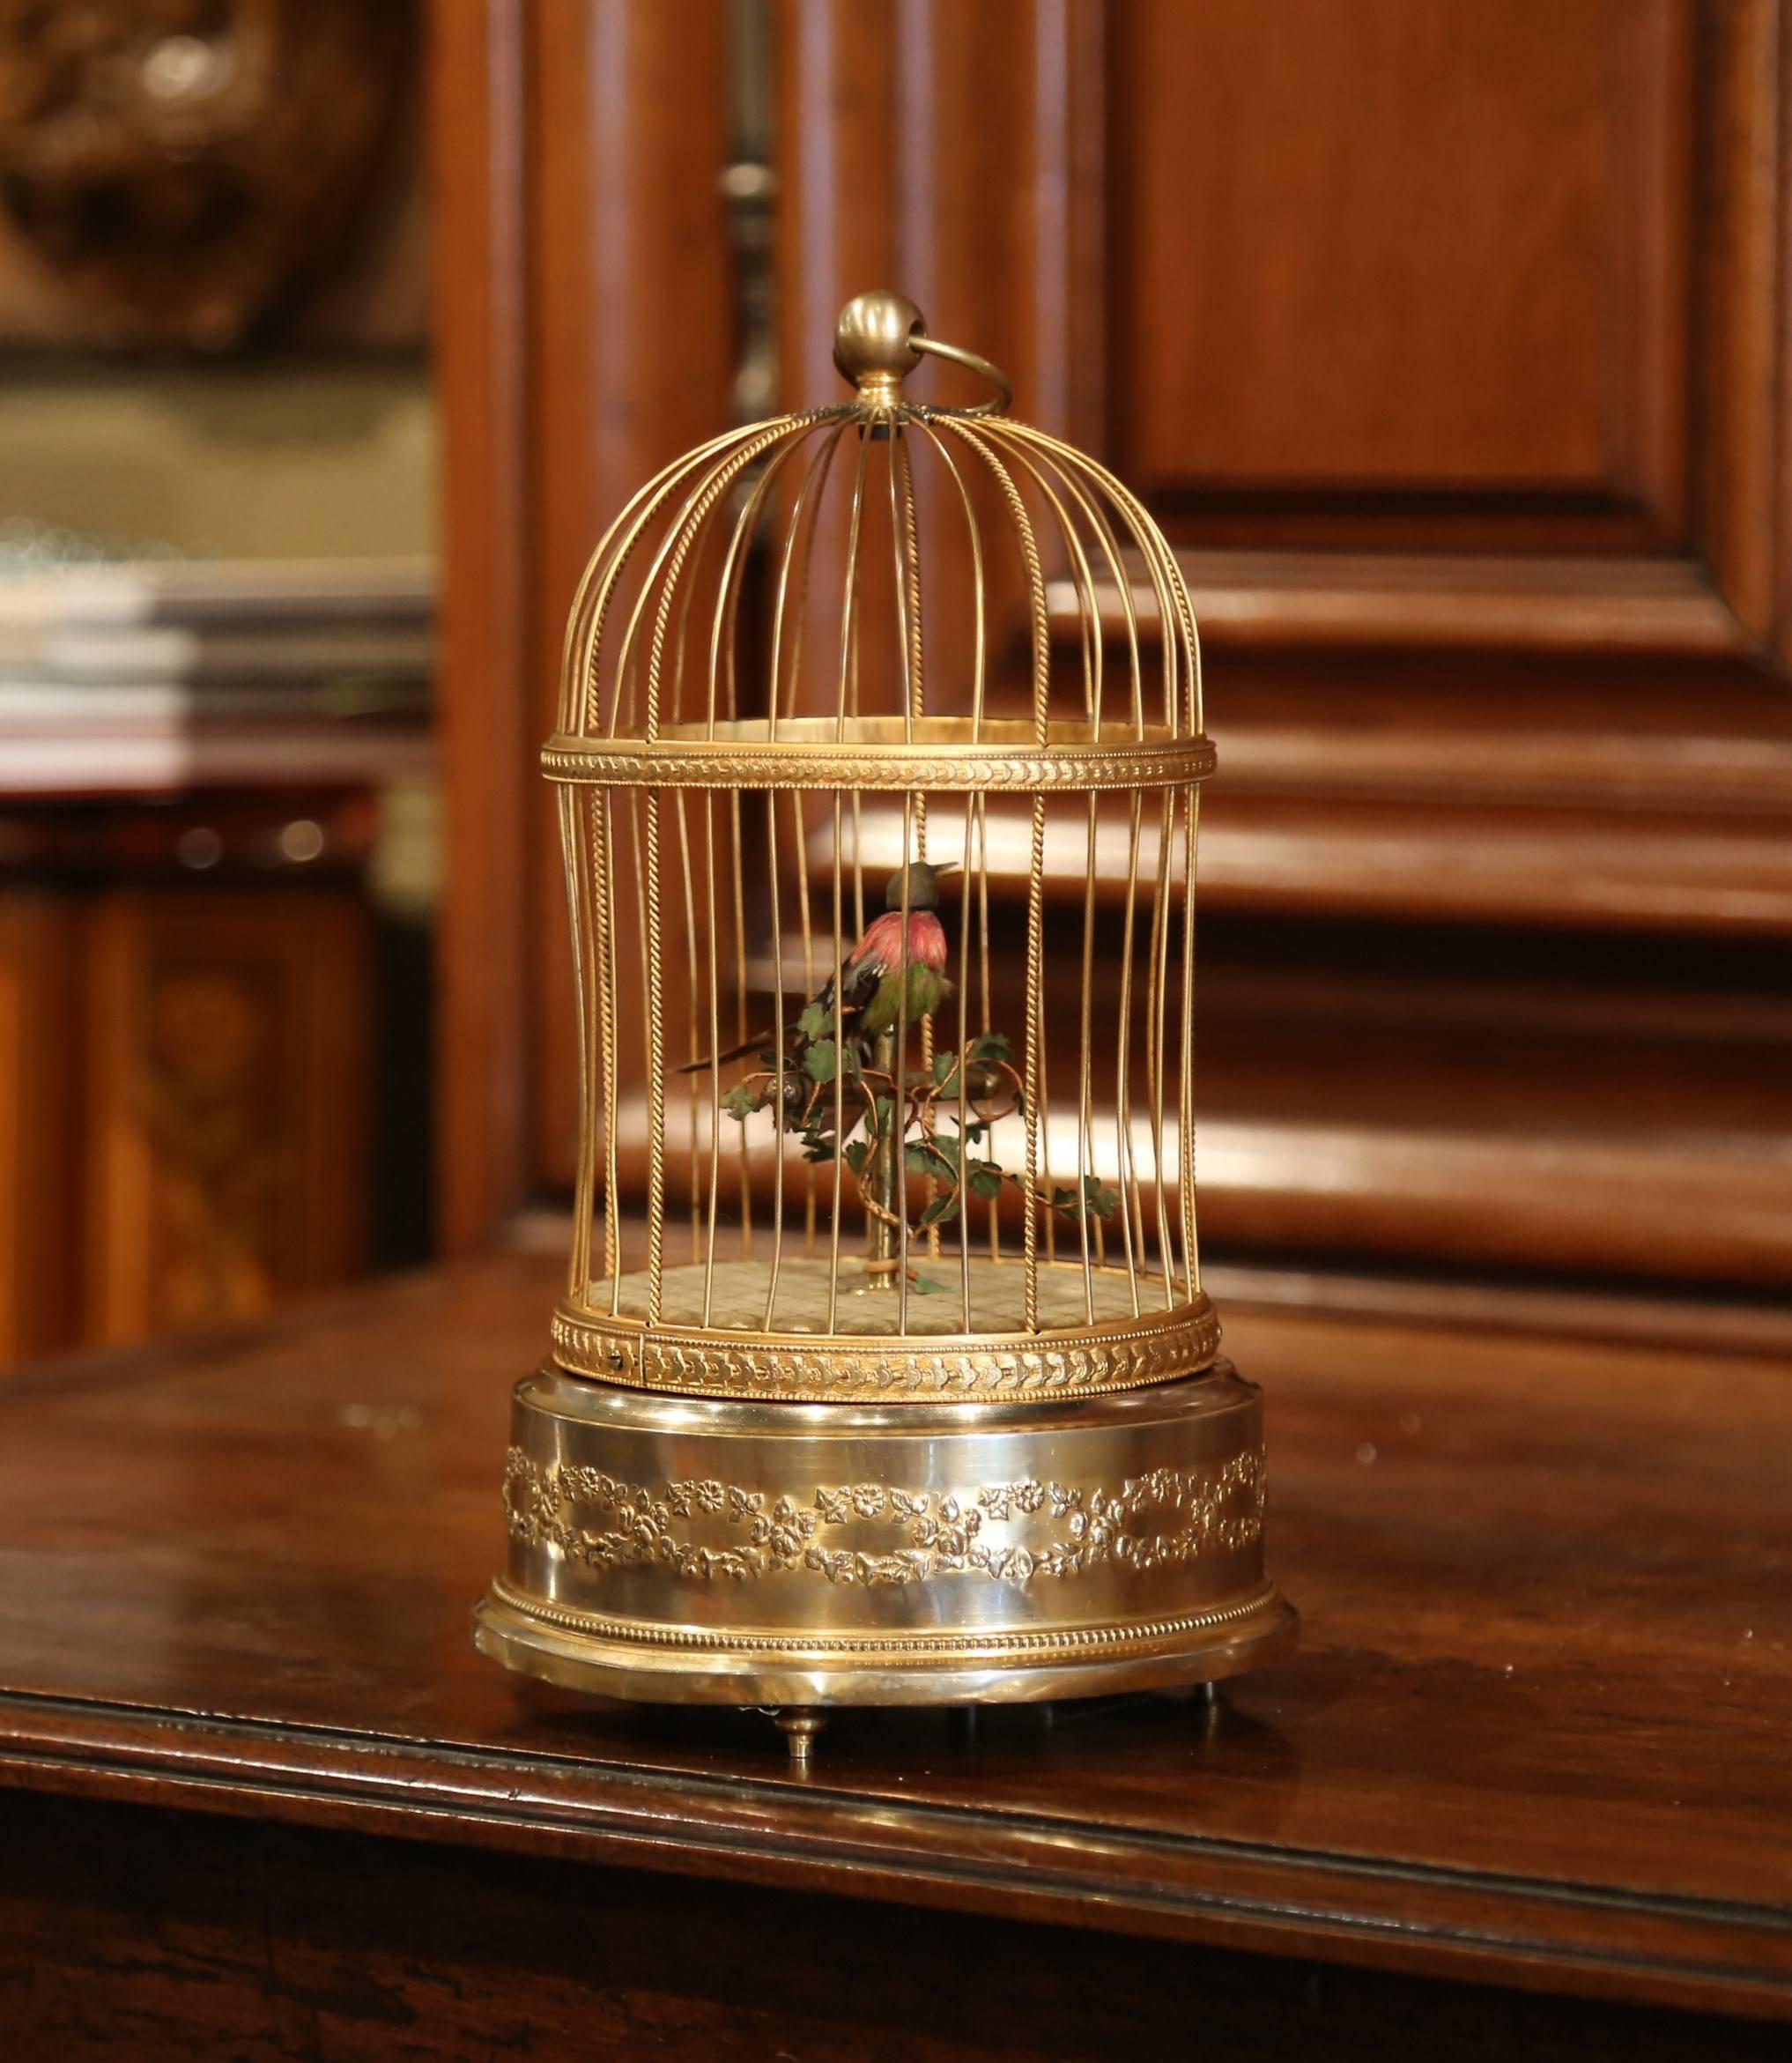 This antique birdcage was found in Paris; crafted circa 1890, the cage is rounded in shape with a dome. Inside it, a miniature automaton feathered colorful bird sits on a branch and sings while moving his head, beak and tail when you activate the